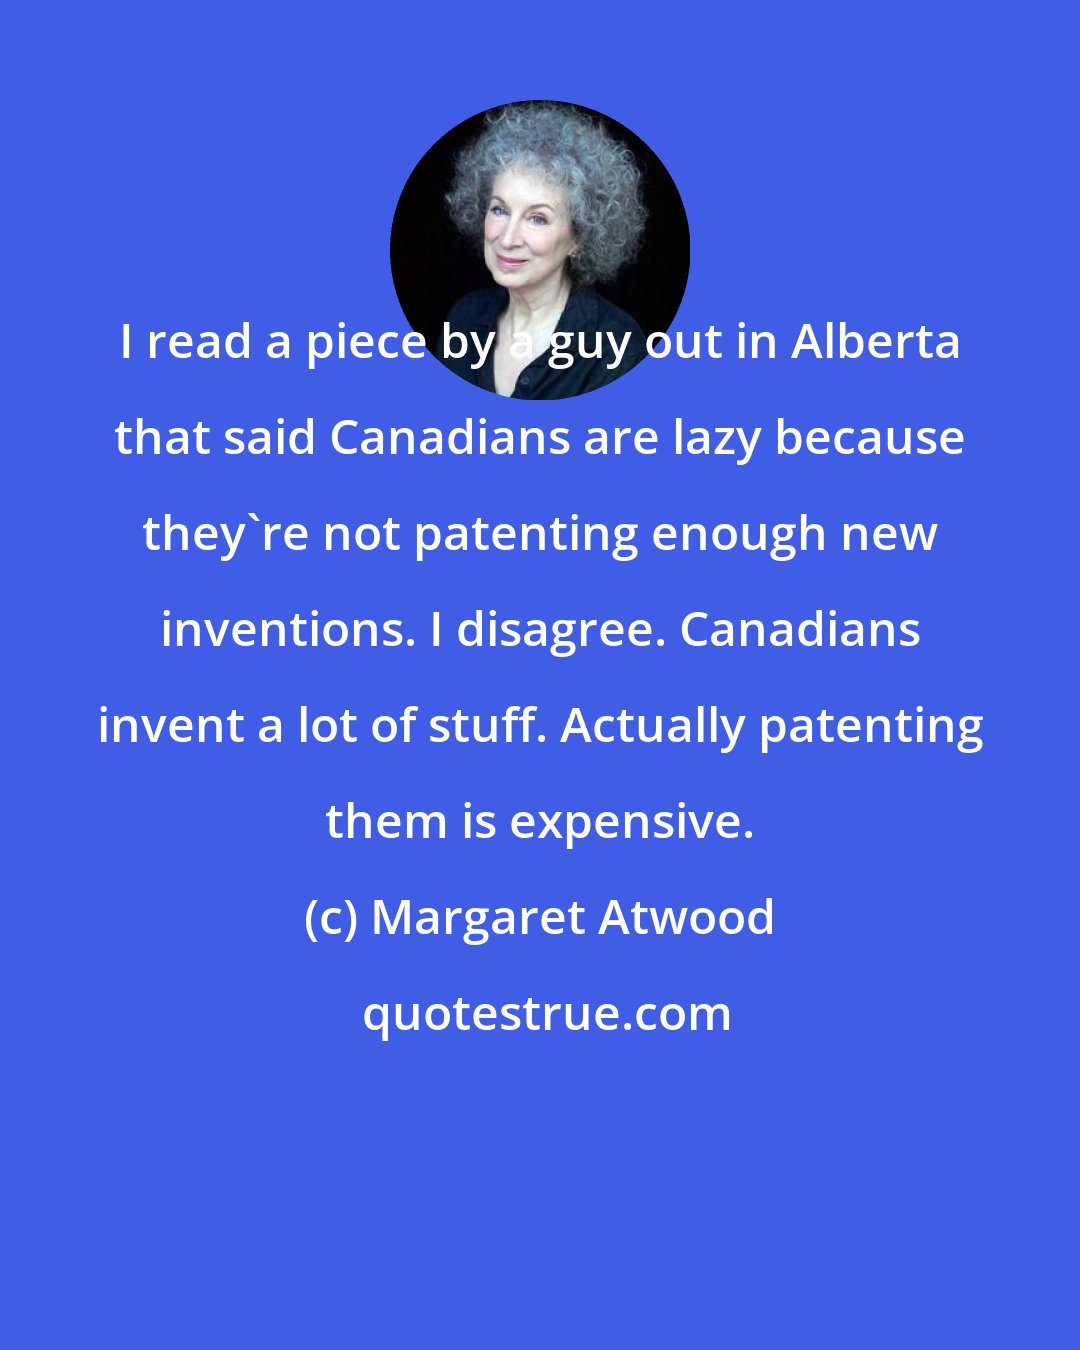 Margaret Atwood: I read a piece by a guy out in Alberta that said Canadians are lazy because they're not patenting enough new inventions. I disagree. Canadians invent a lot of stuff. Actually patenting them is expensive.